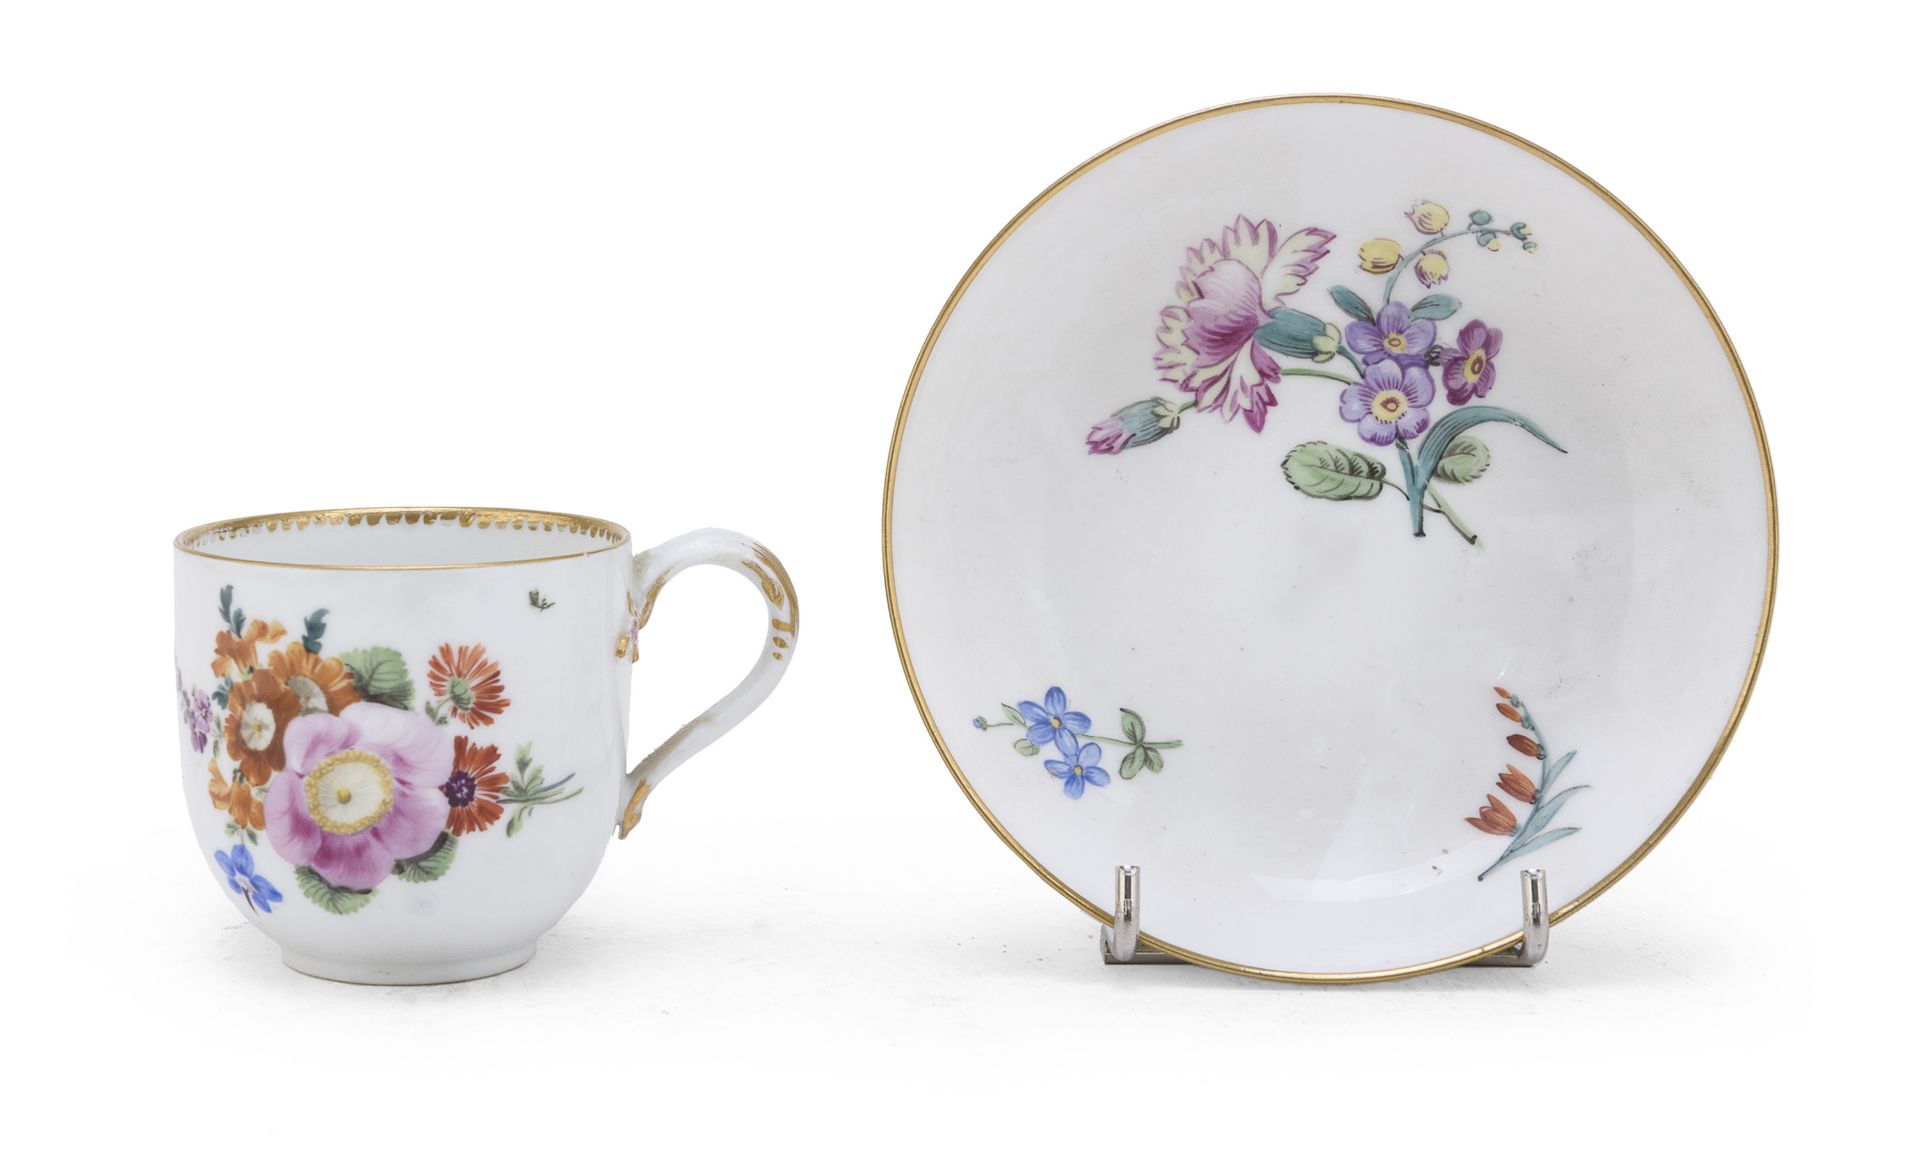 MUG AND SAUCER IN PORCELAIN MEISSEN MARCOLINI LATE 18TH CENTURY